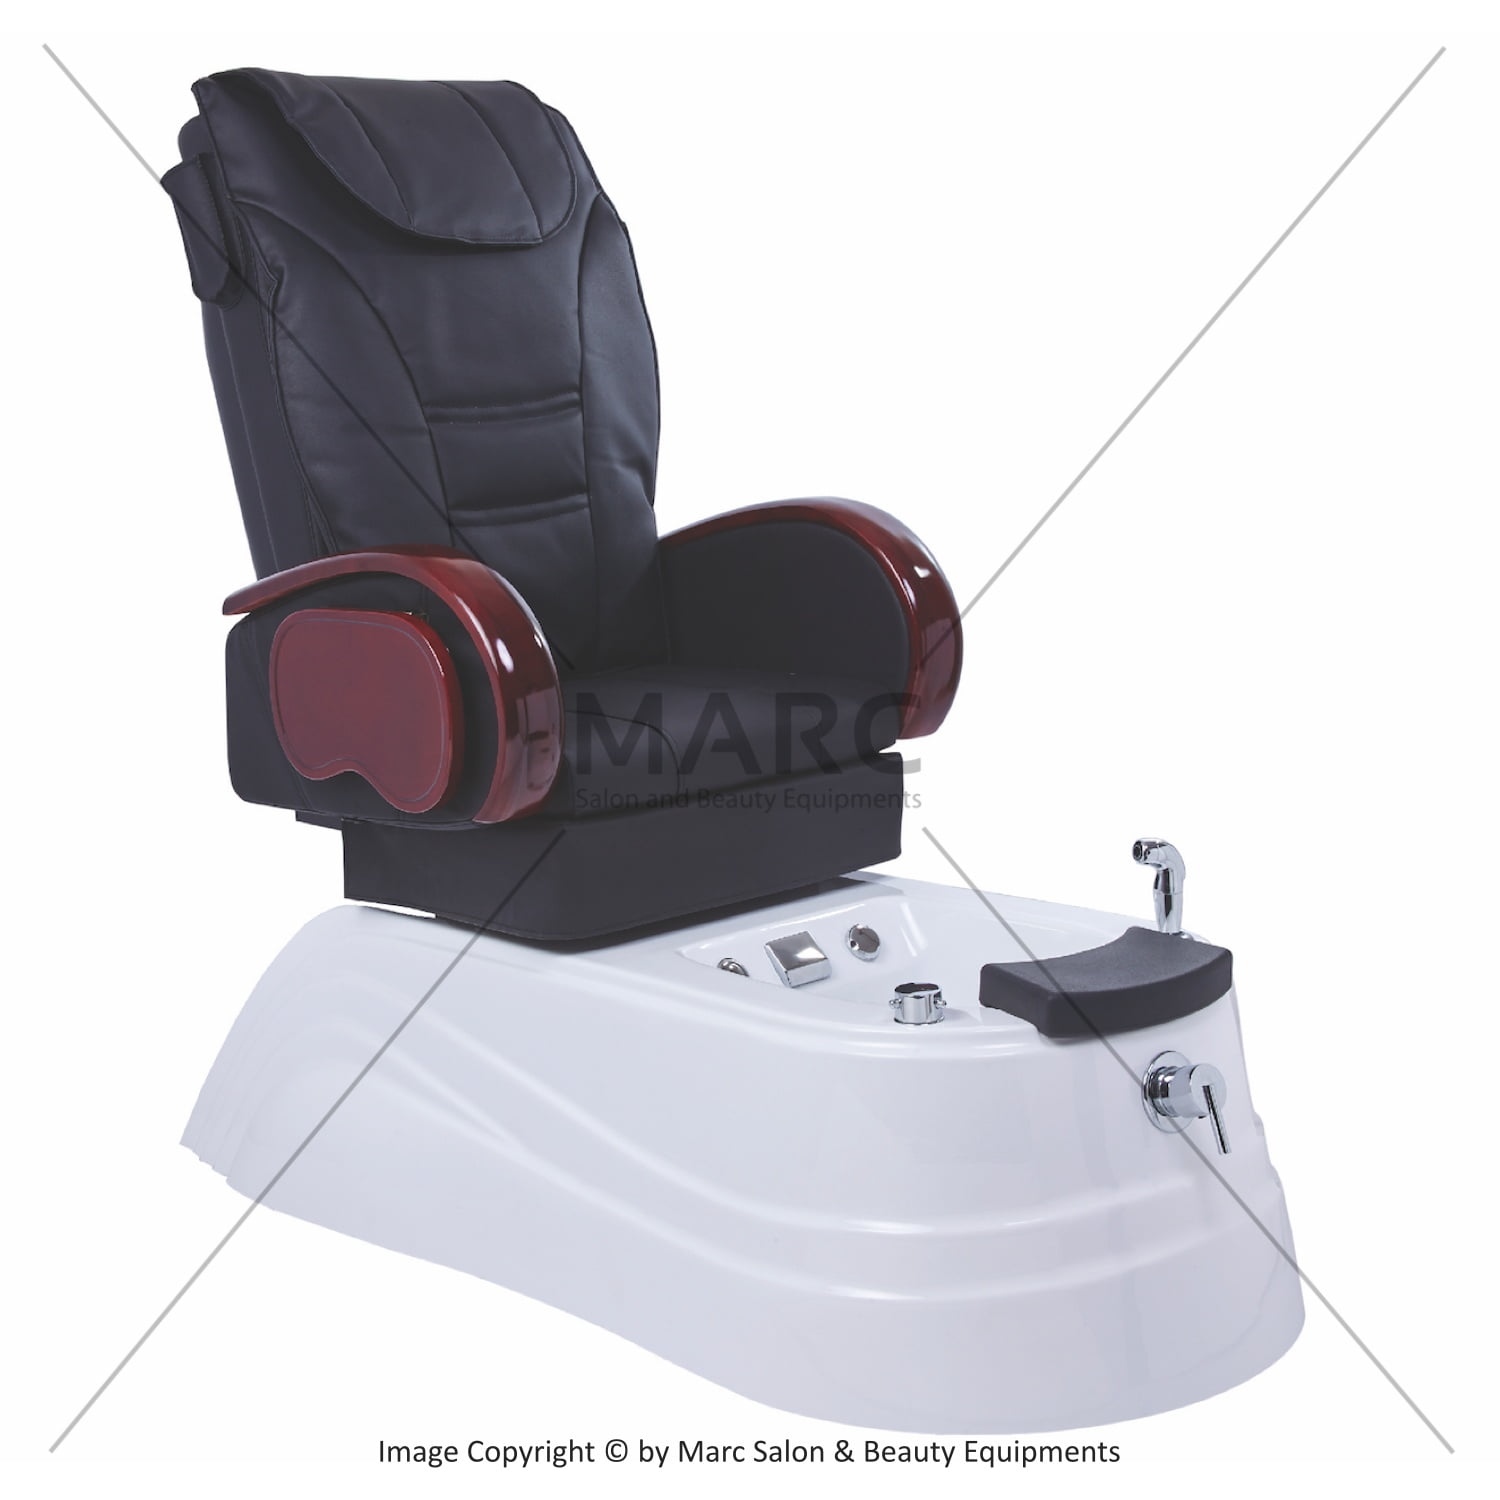 pedicure spa stations in Mohali